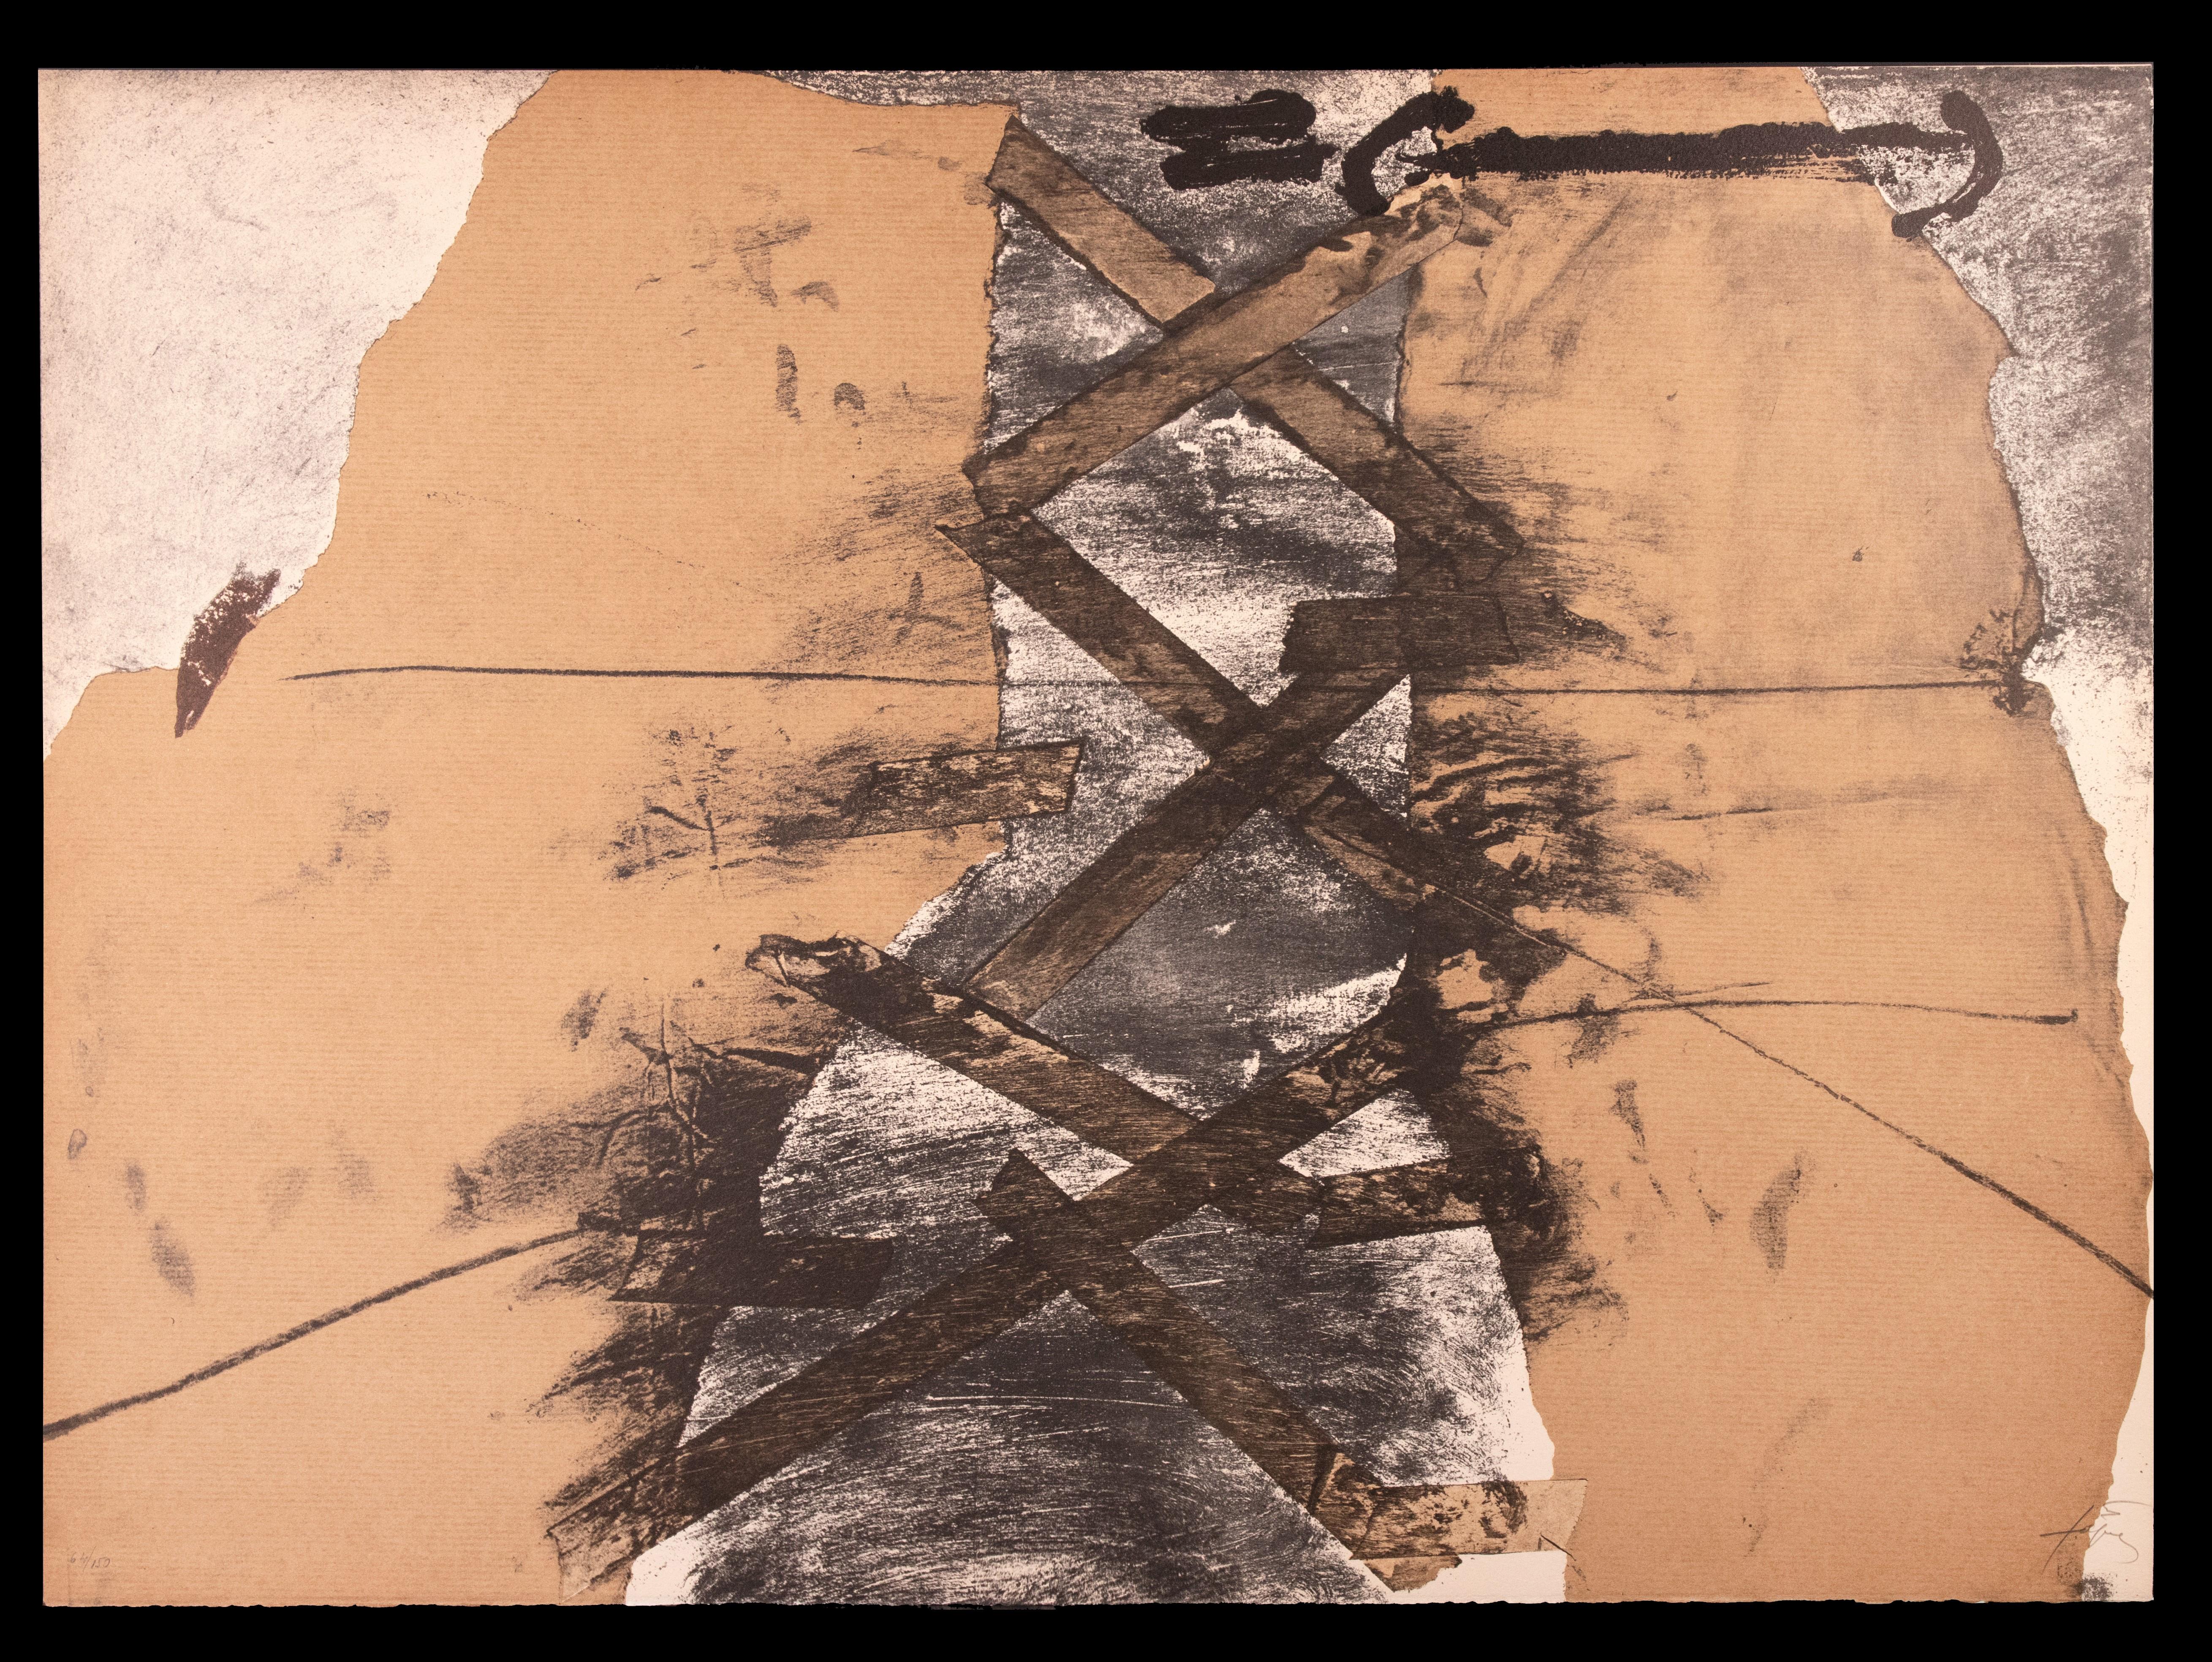 Antoni Tàpies Abstract Print - Untitled - Lithograph by Antoni Tapies - 1974